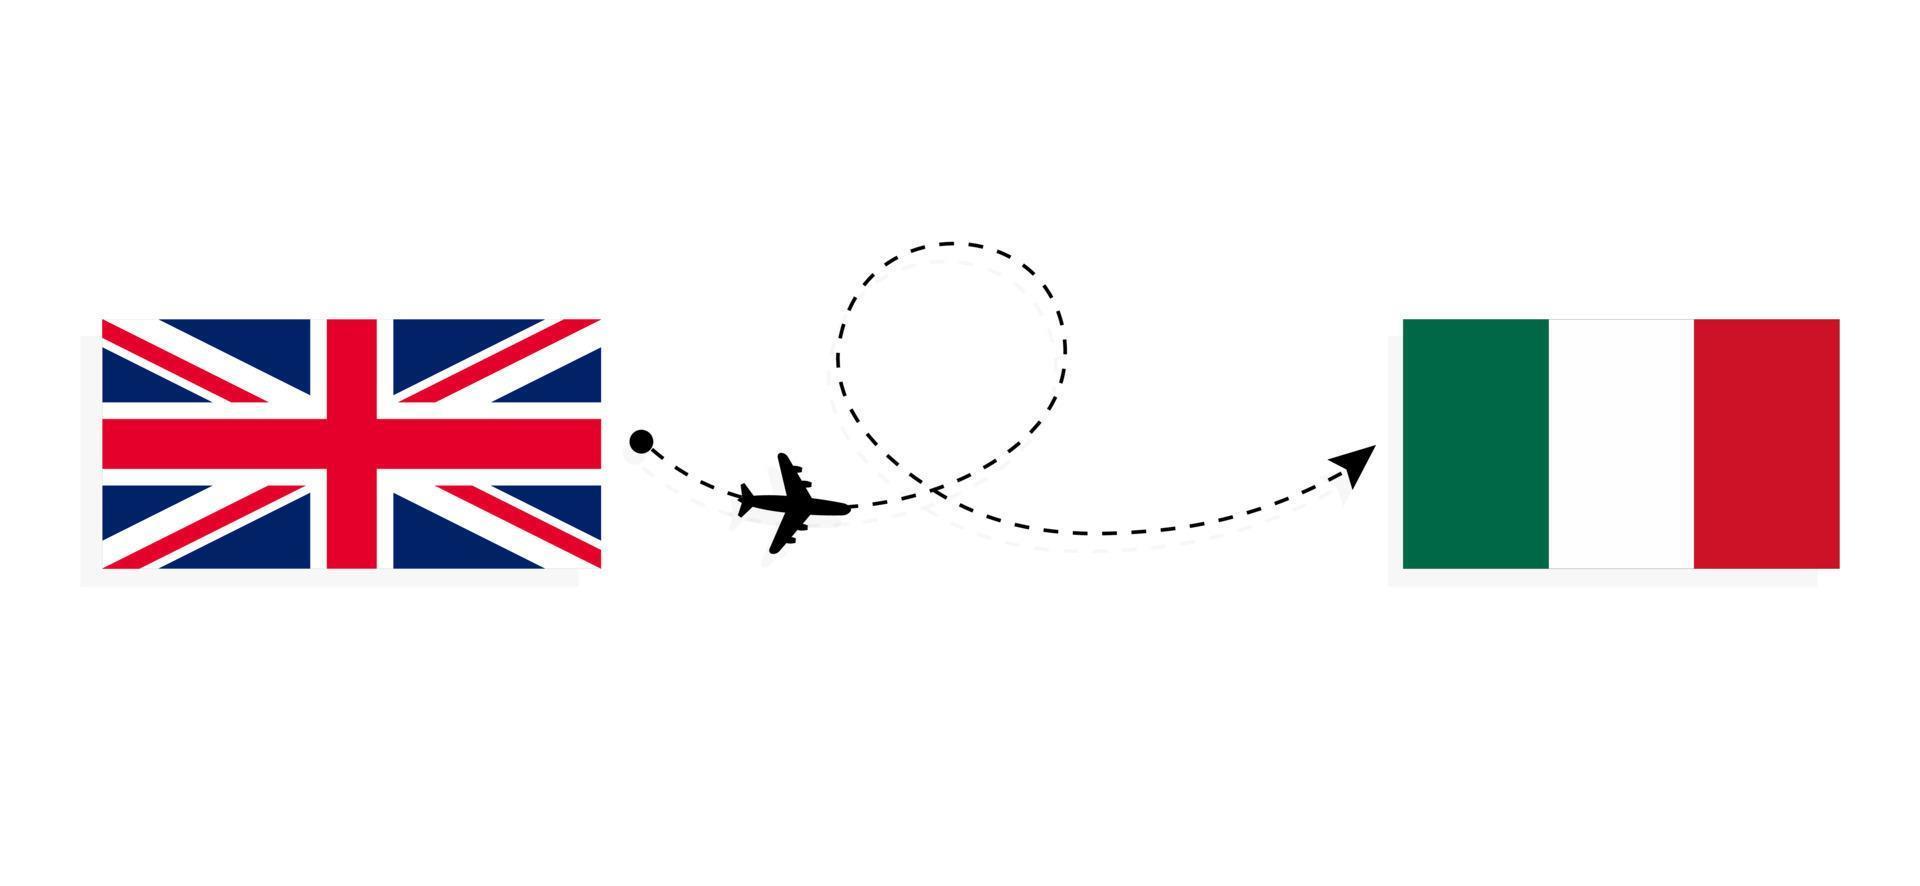 Flight and travel from United Kingdom of Great Britain to Mexico by passenger airplane Travel concept vector